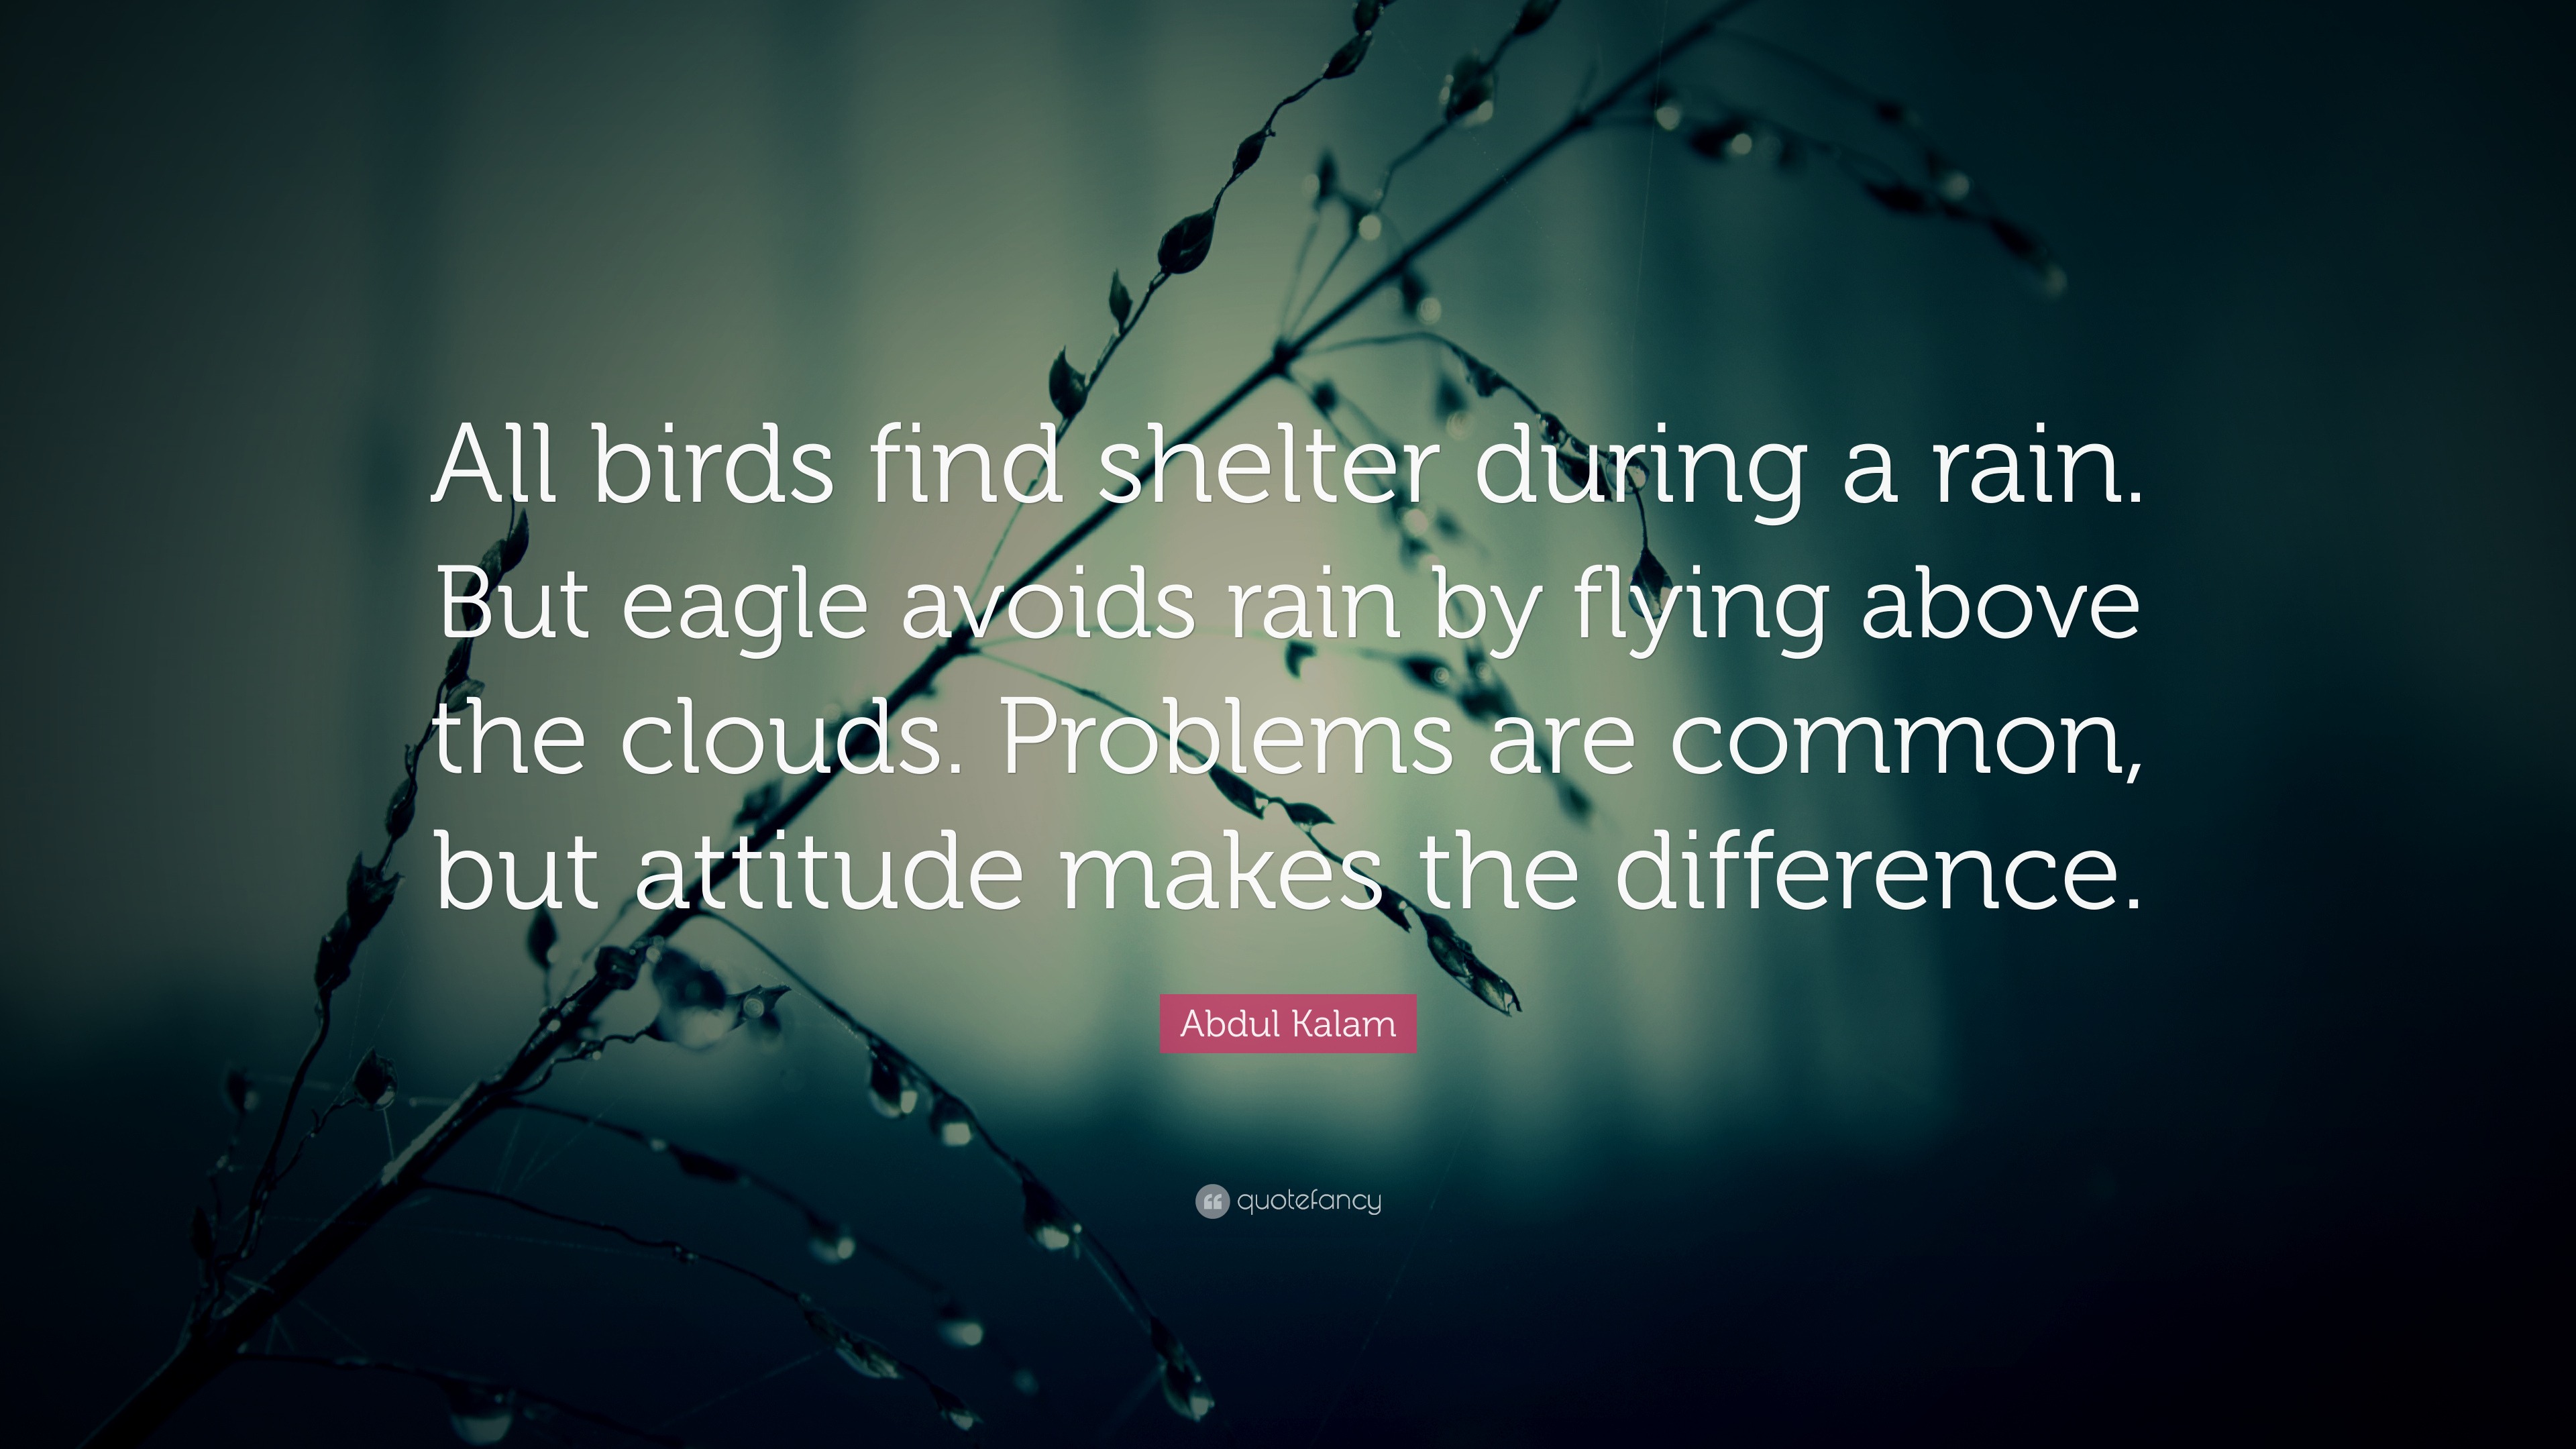 Abdul Kalam Quote: “All birds find shelter during a rain. But eagle